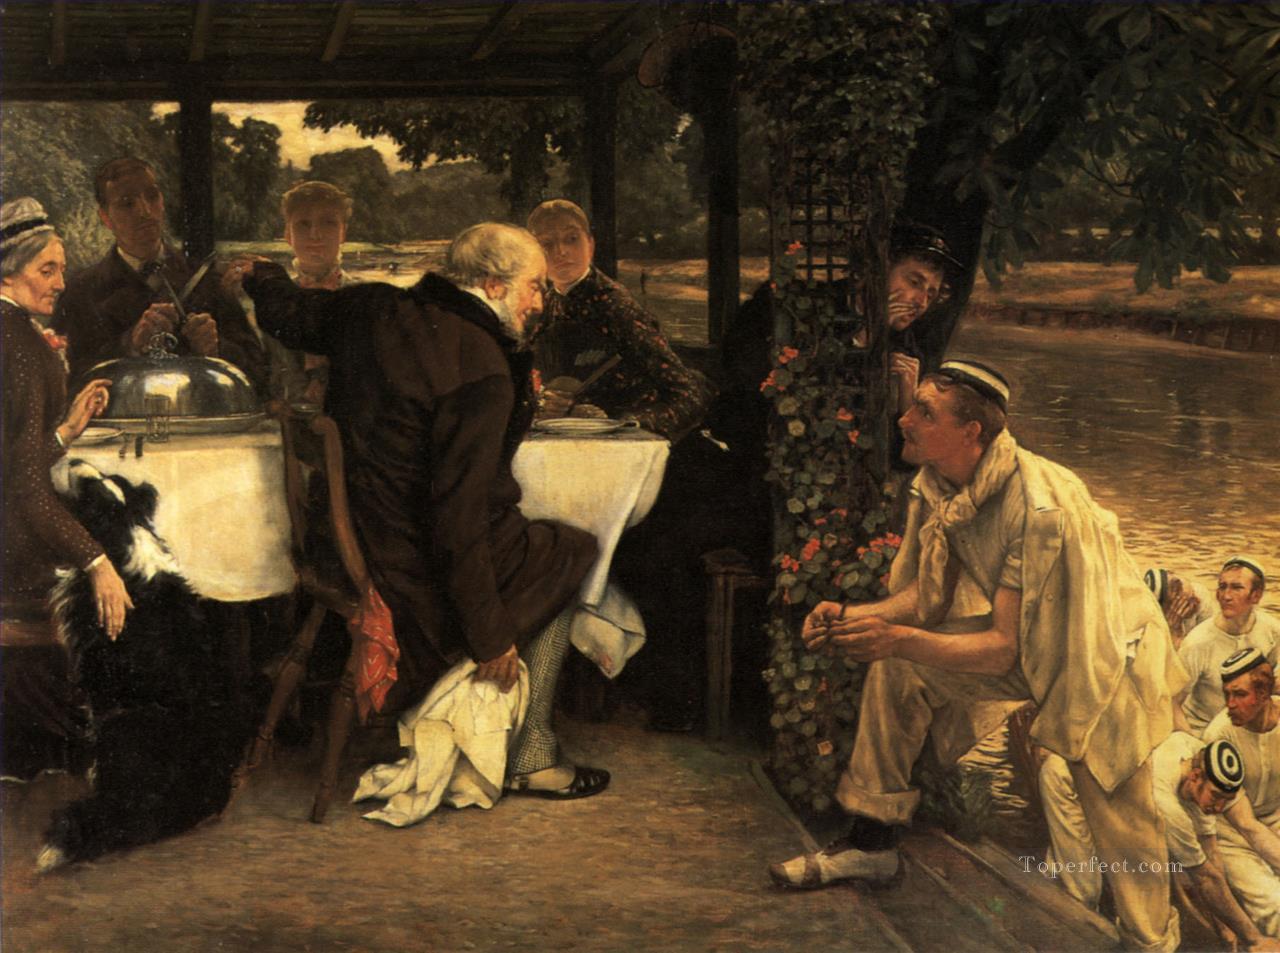 The Prodigal Son The Fatted Calf James Jacques Joseph Tissot Oil Paintings